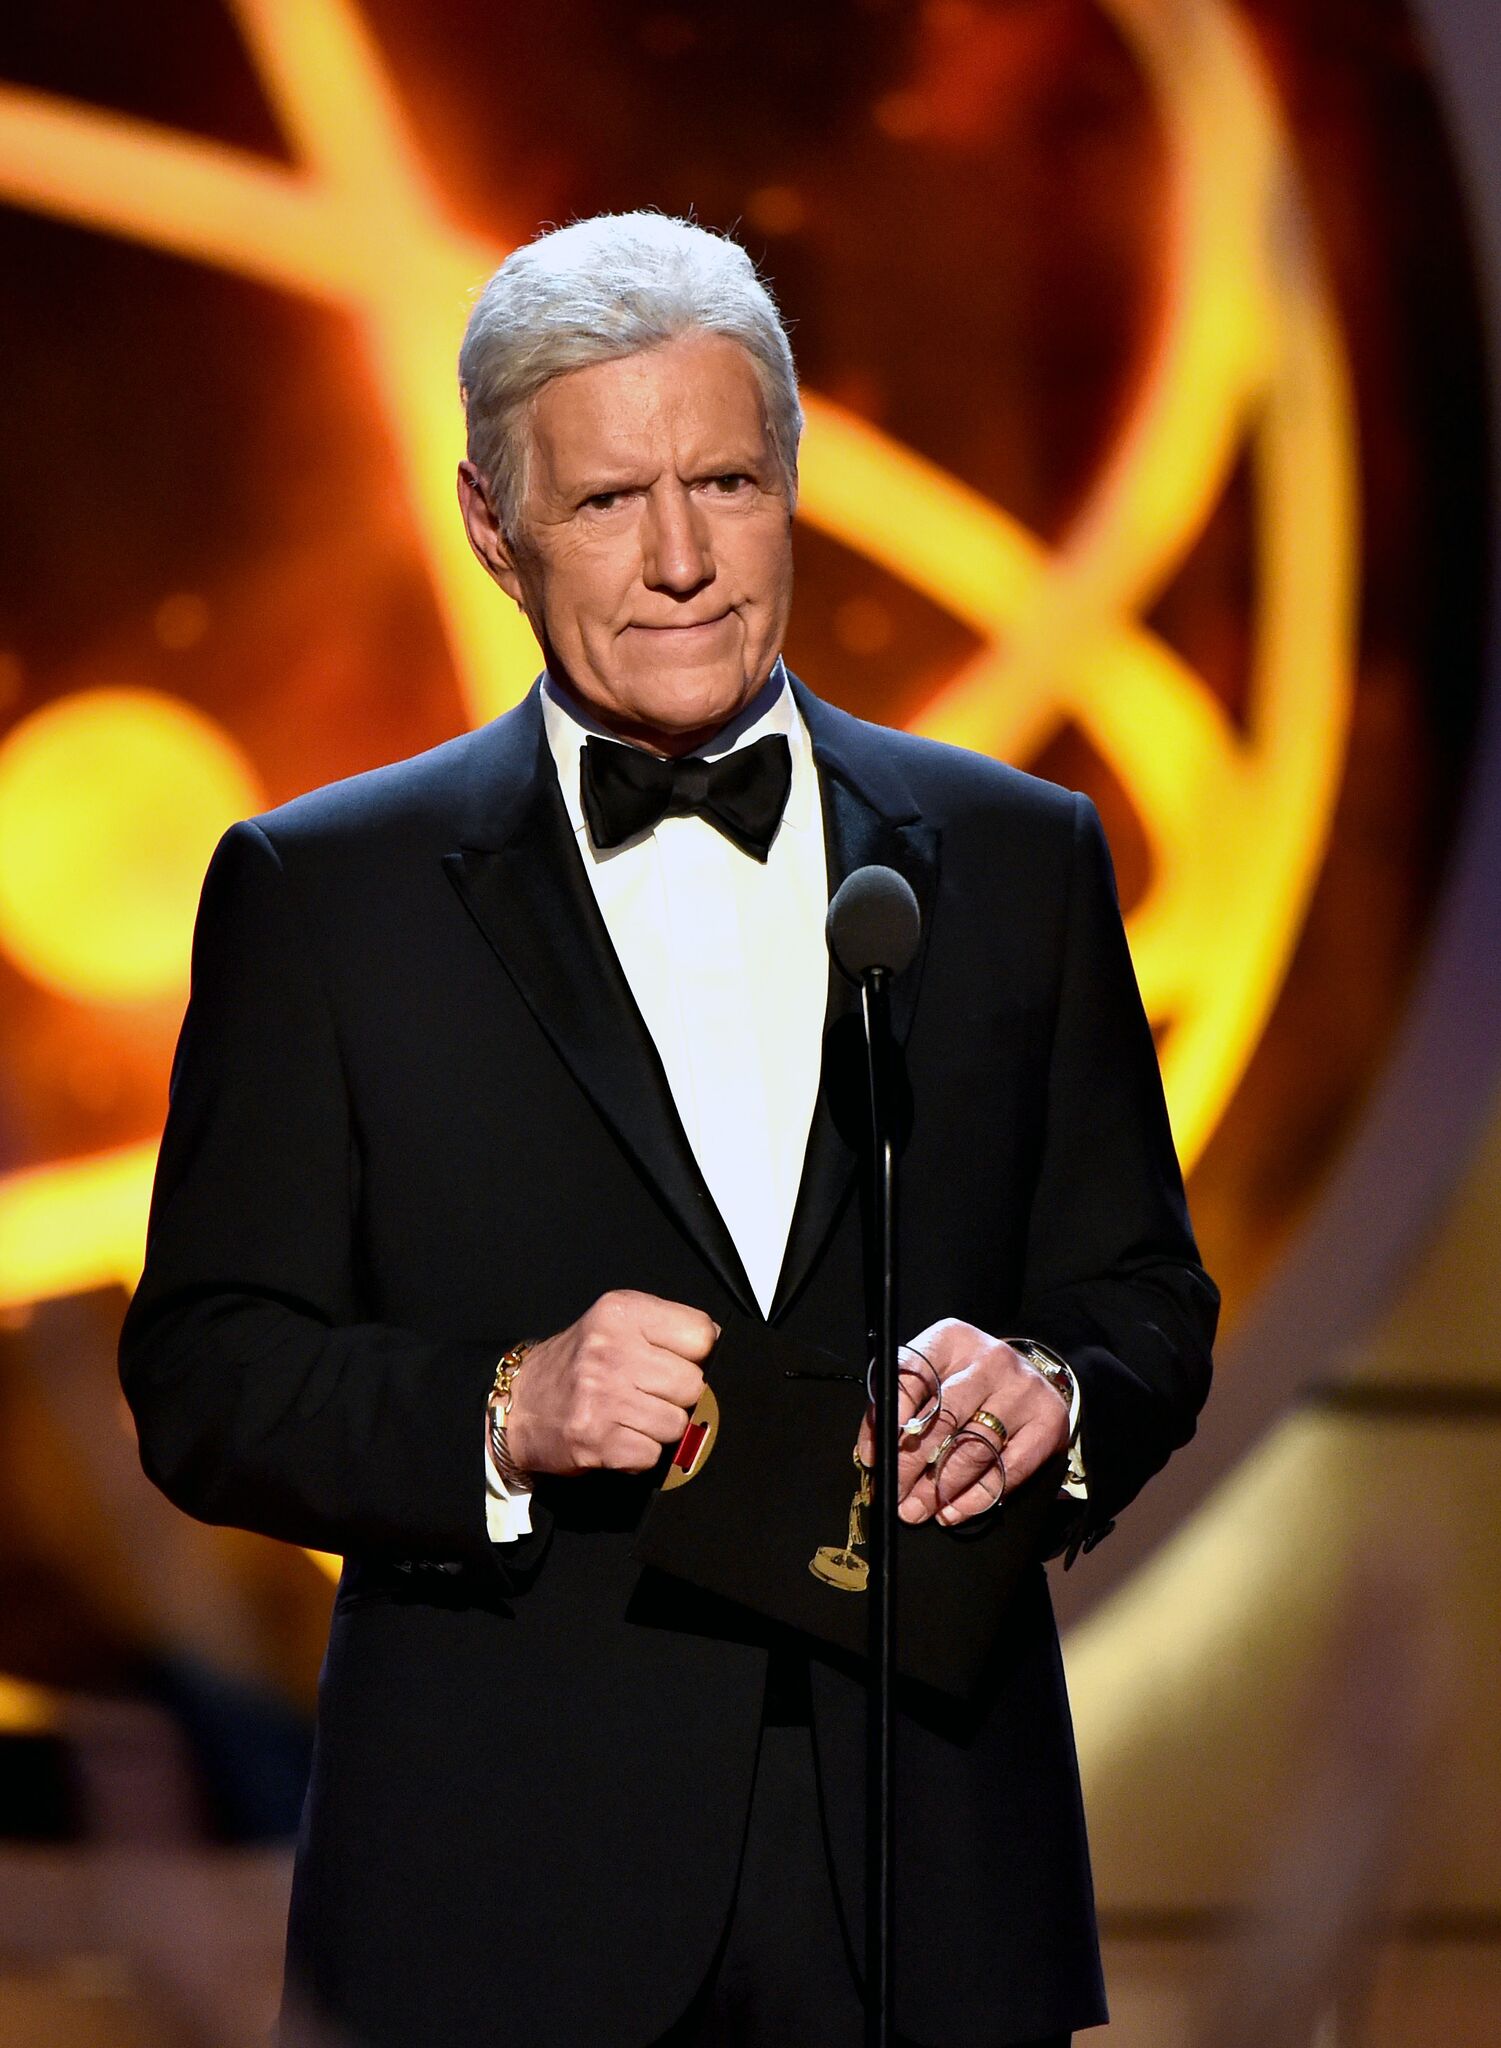 Alex Trebek speaks onstage at the 46th annual Daytime Emmy Awards at Pasadena Civic Center | Getty Images